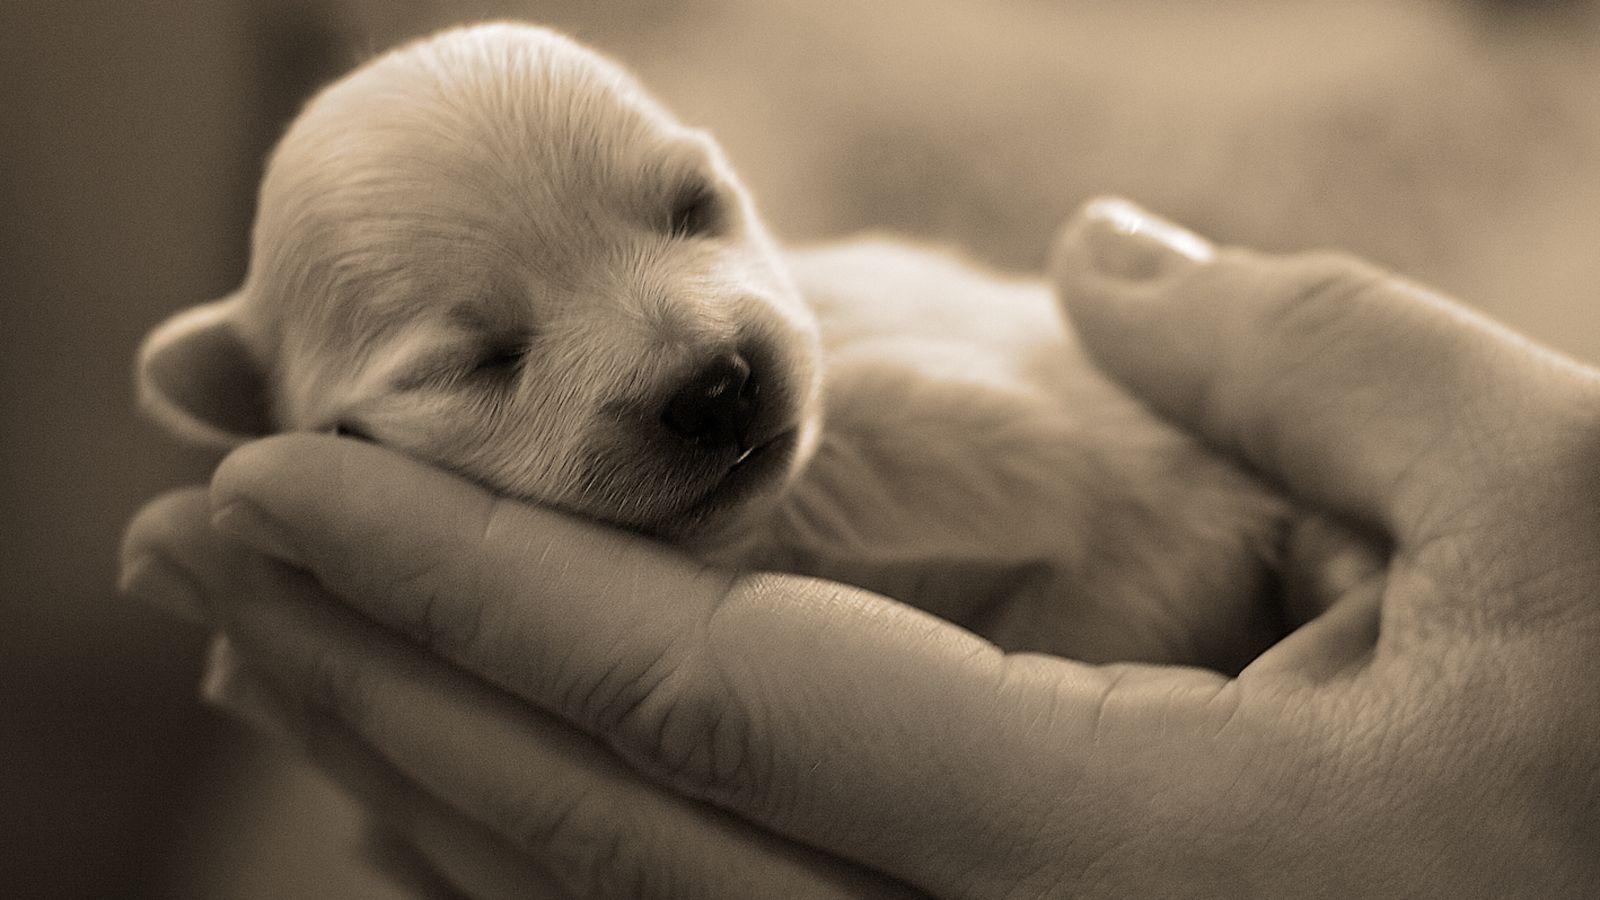 The dog in world So much cute photo about dogs Wallpaper 1600x900